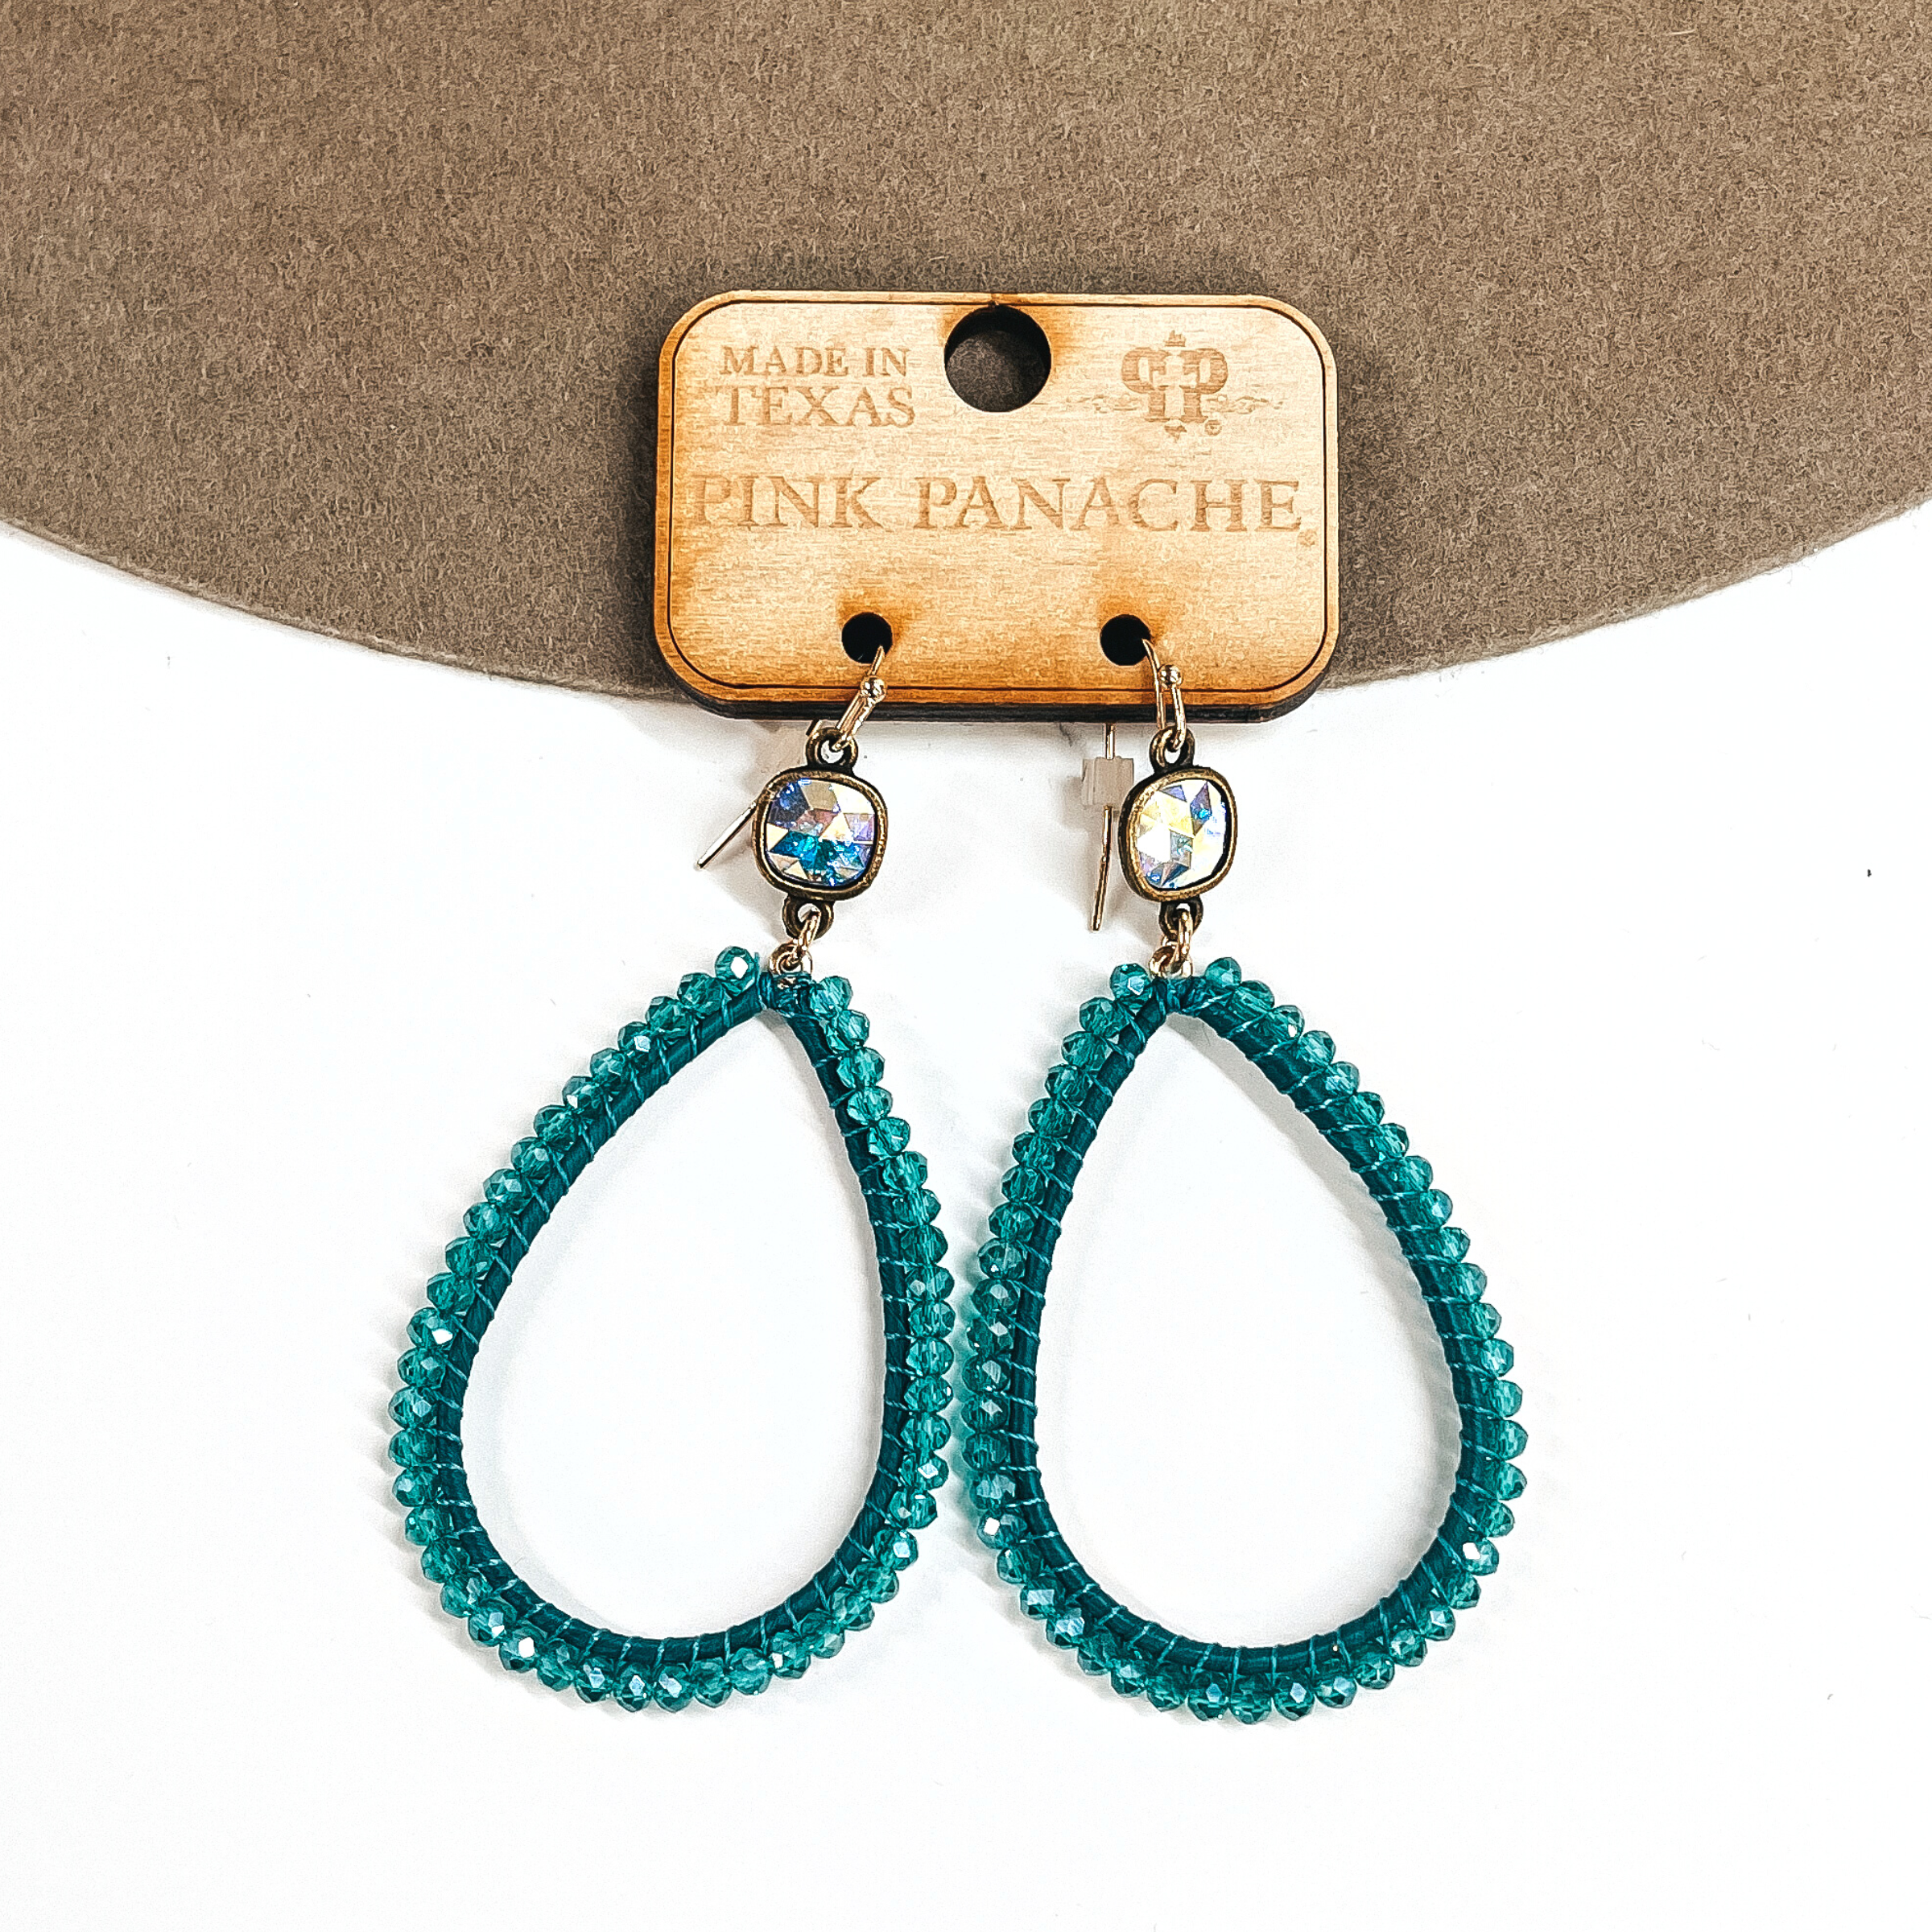 Pink Panache | Teal Crystal Beaded Wrapped Teardrop Earrings with Ab Cushion Cut - Giddy Up Glamour Boutique